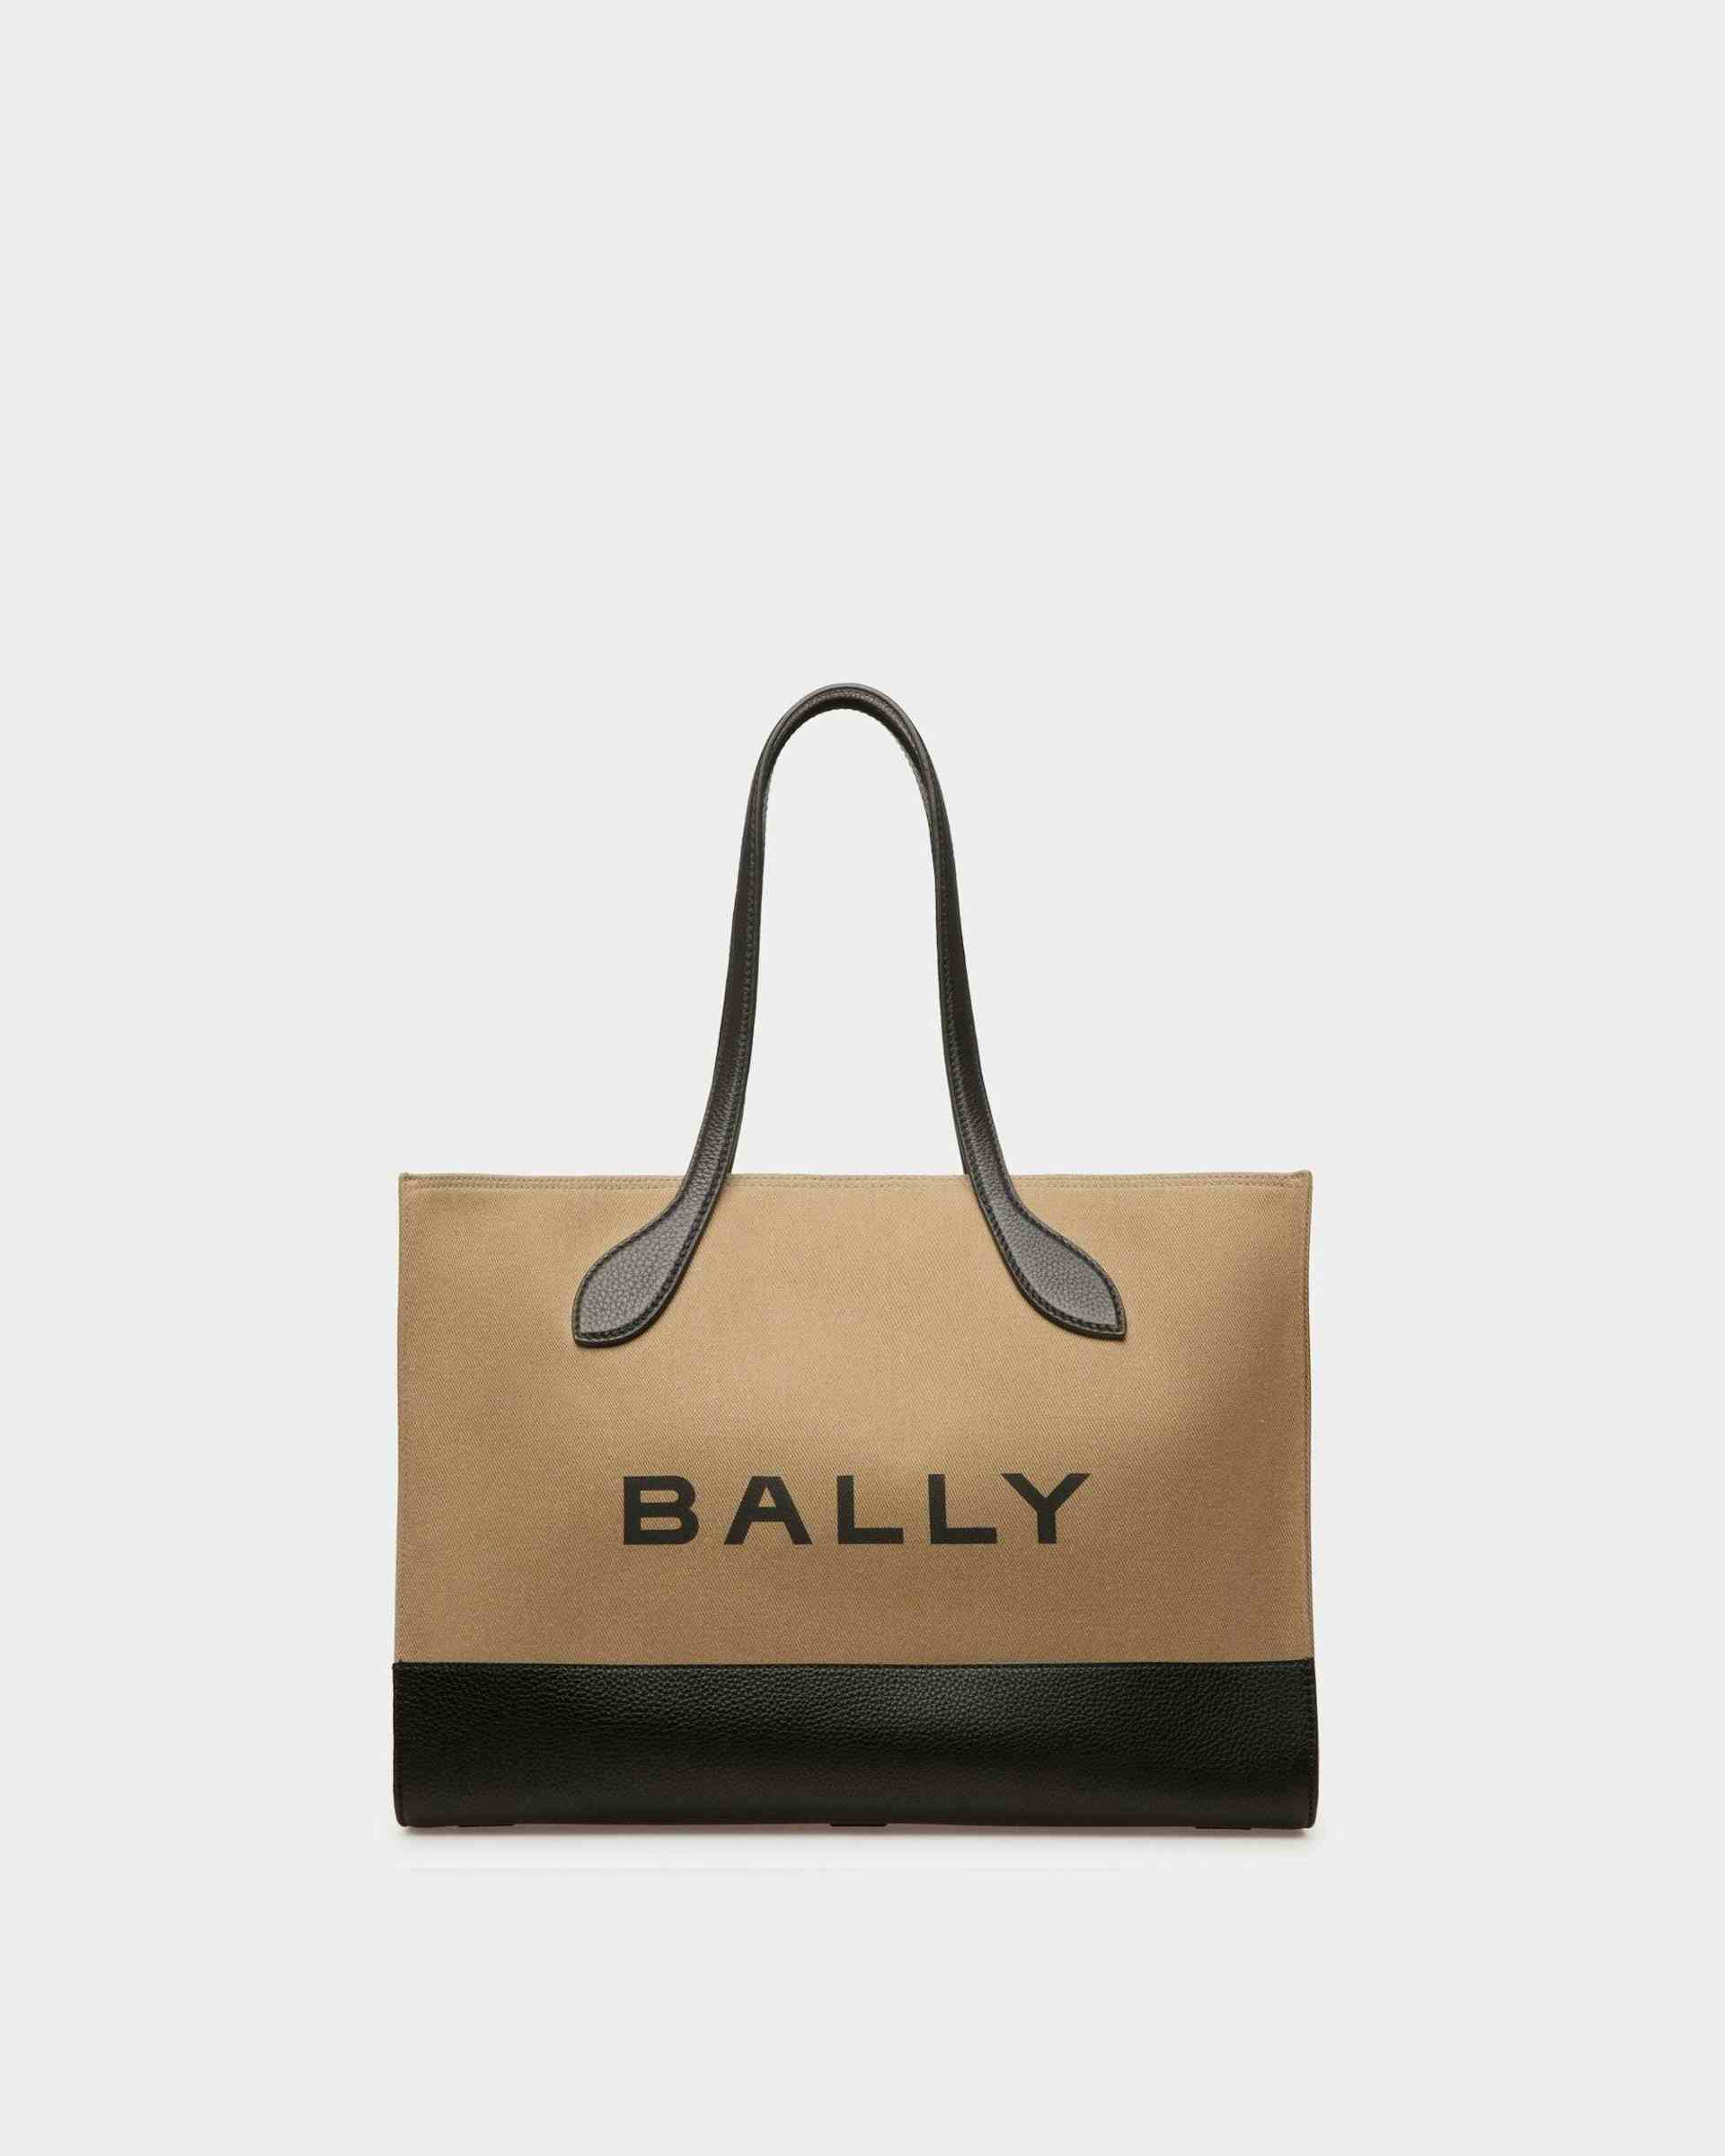 Bar Tote Bag In Sand And Black Fabric - Women's - Bally